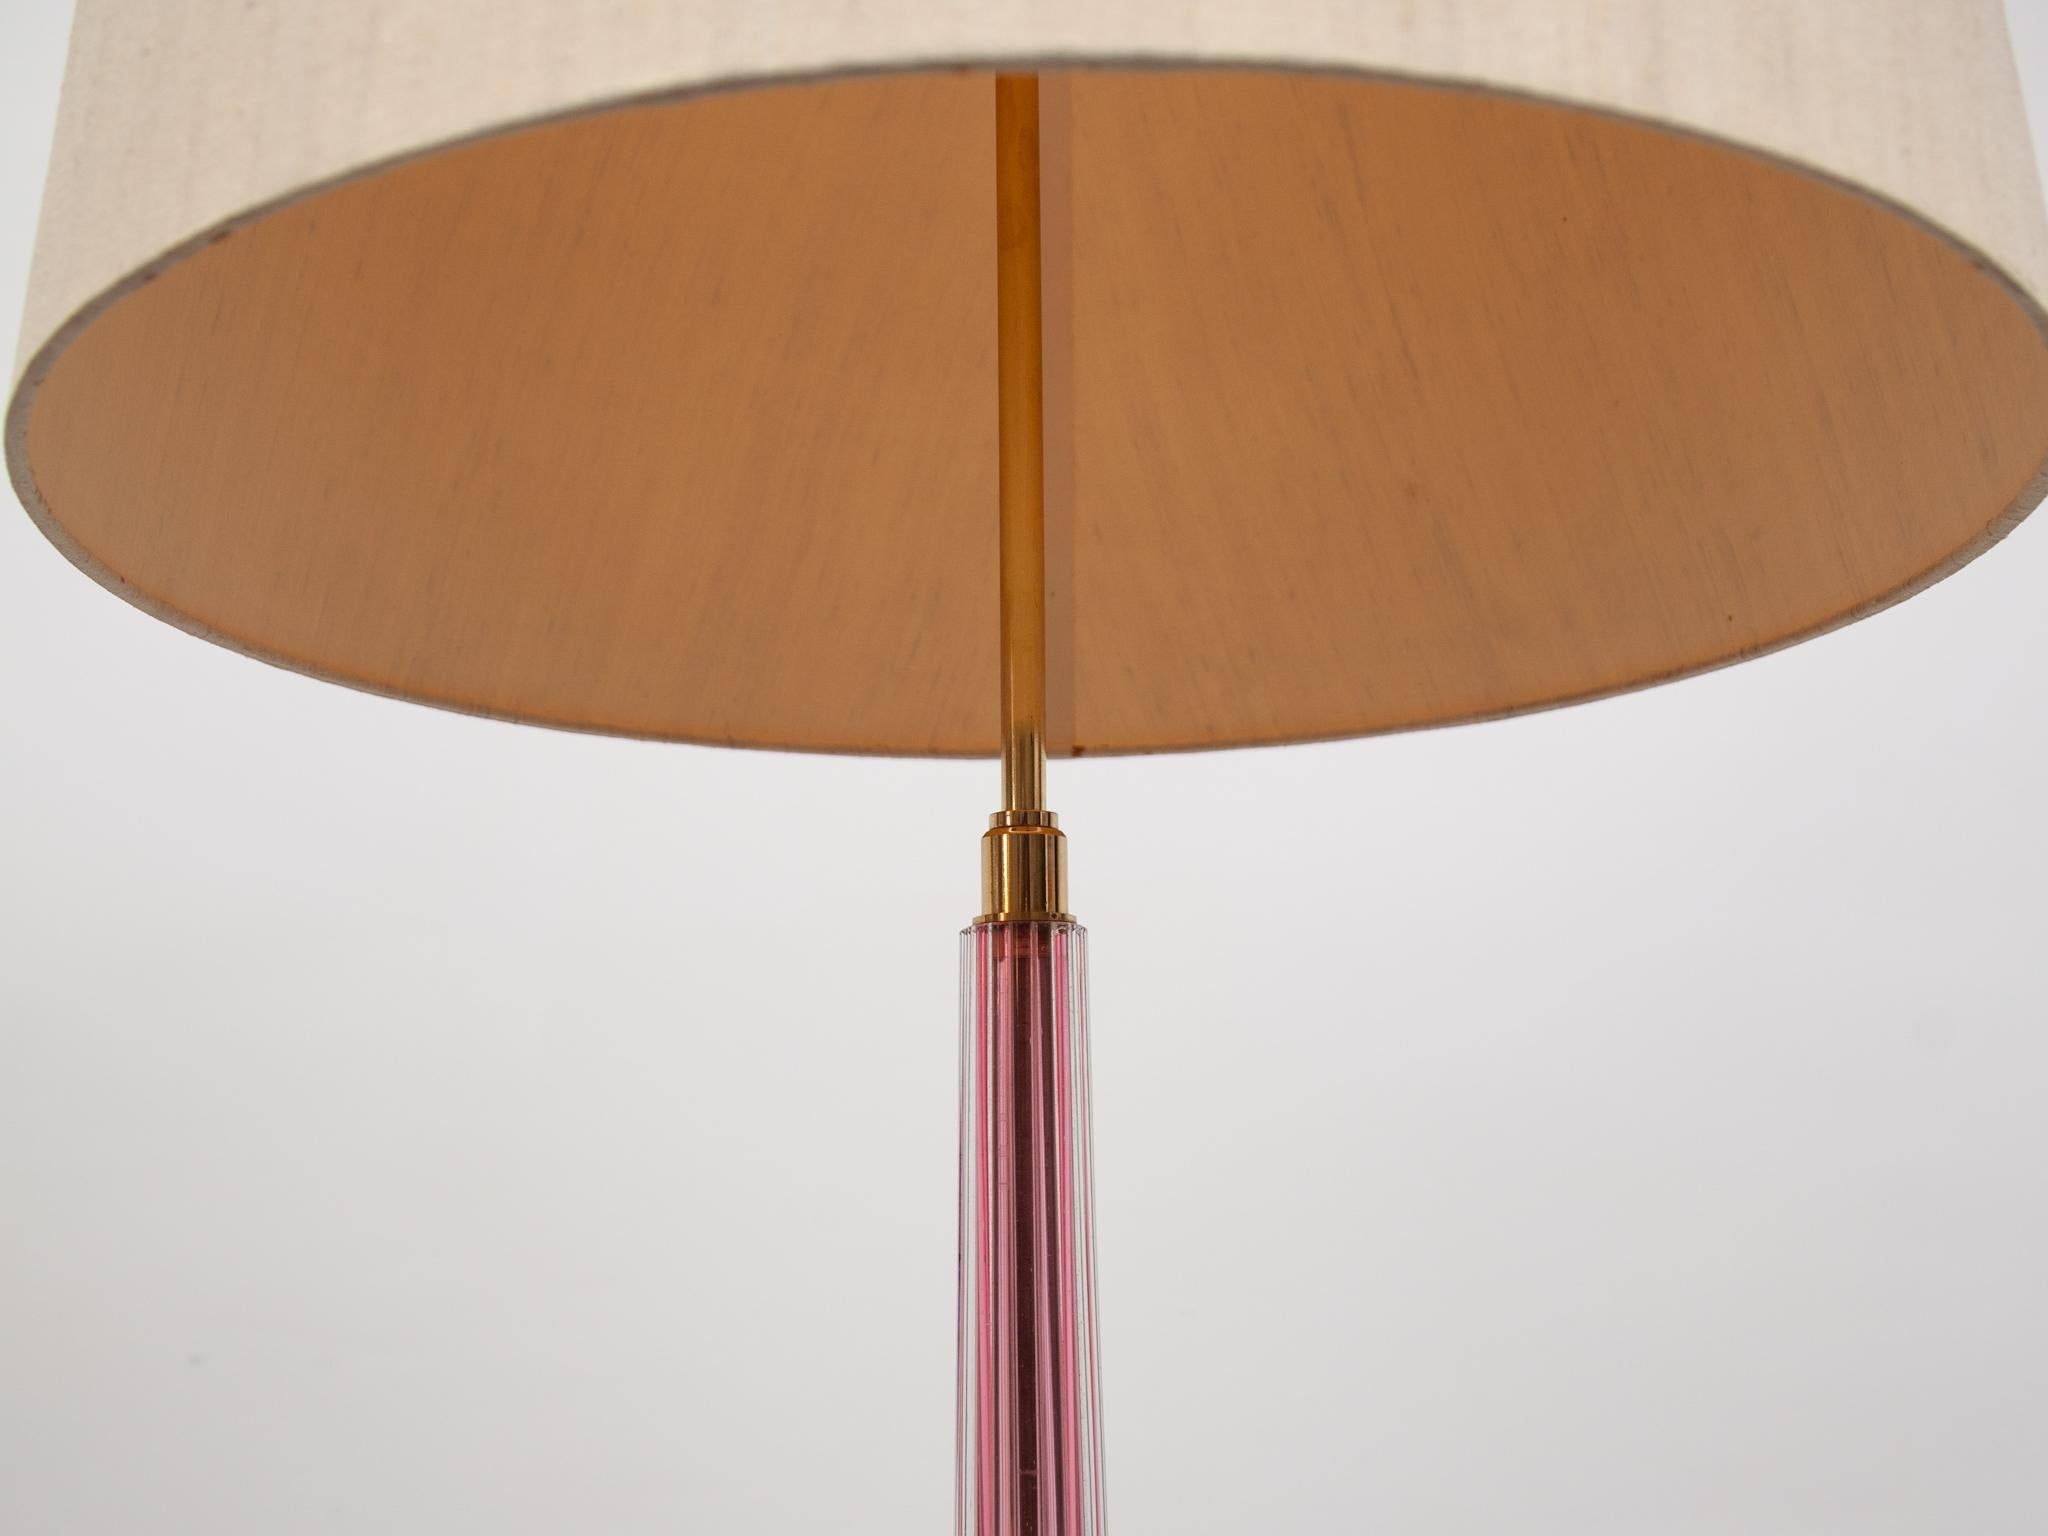 Barovier e Tosso Pink Art Glass Floor Lamp, Murano Blown Glass, 1950s, Italy For Sale 4